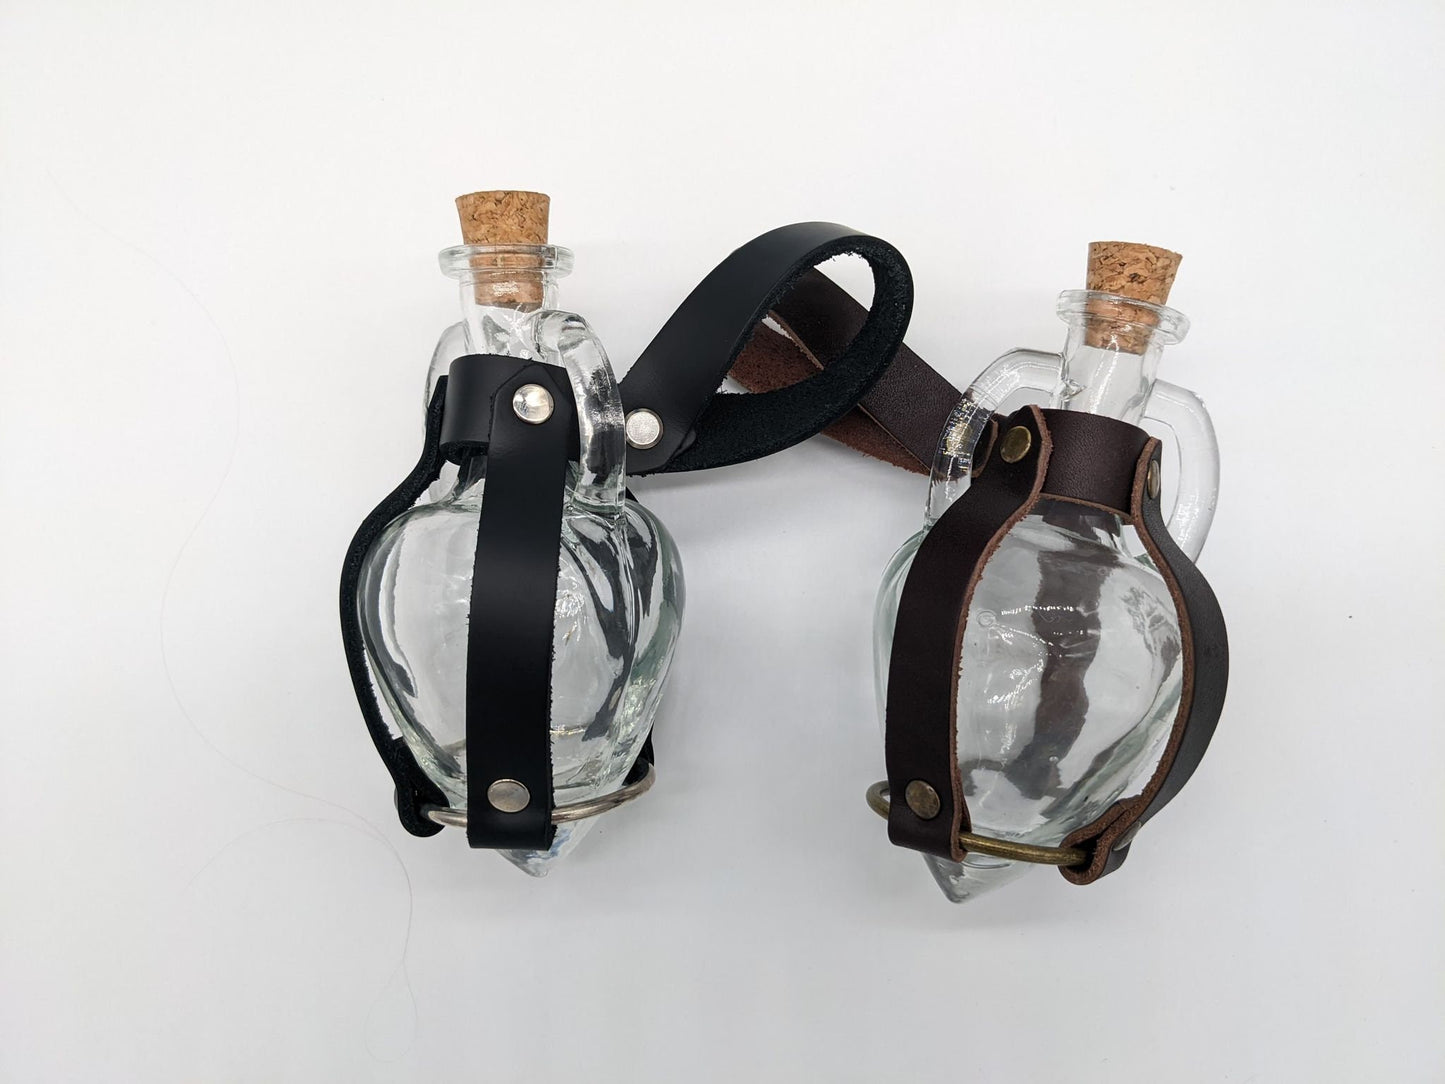 Amphora Flask Potion Bottle Glass and Leather